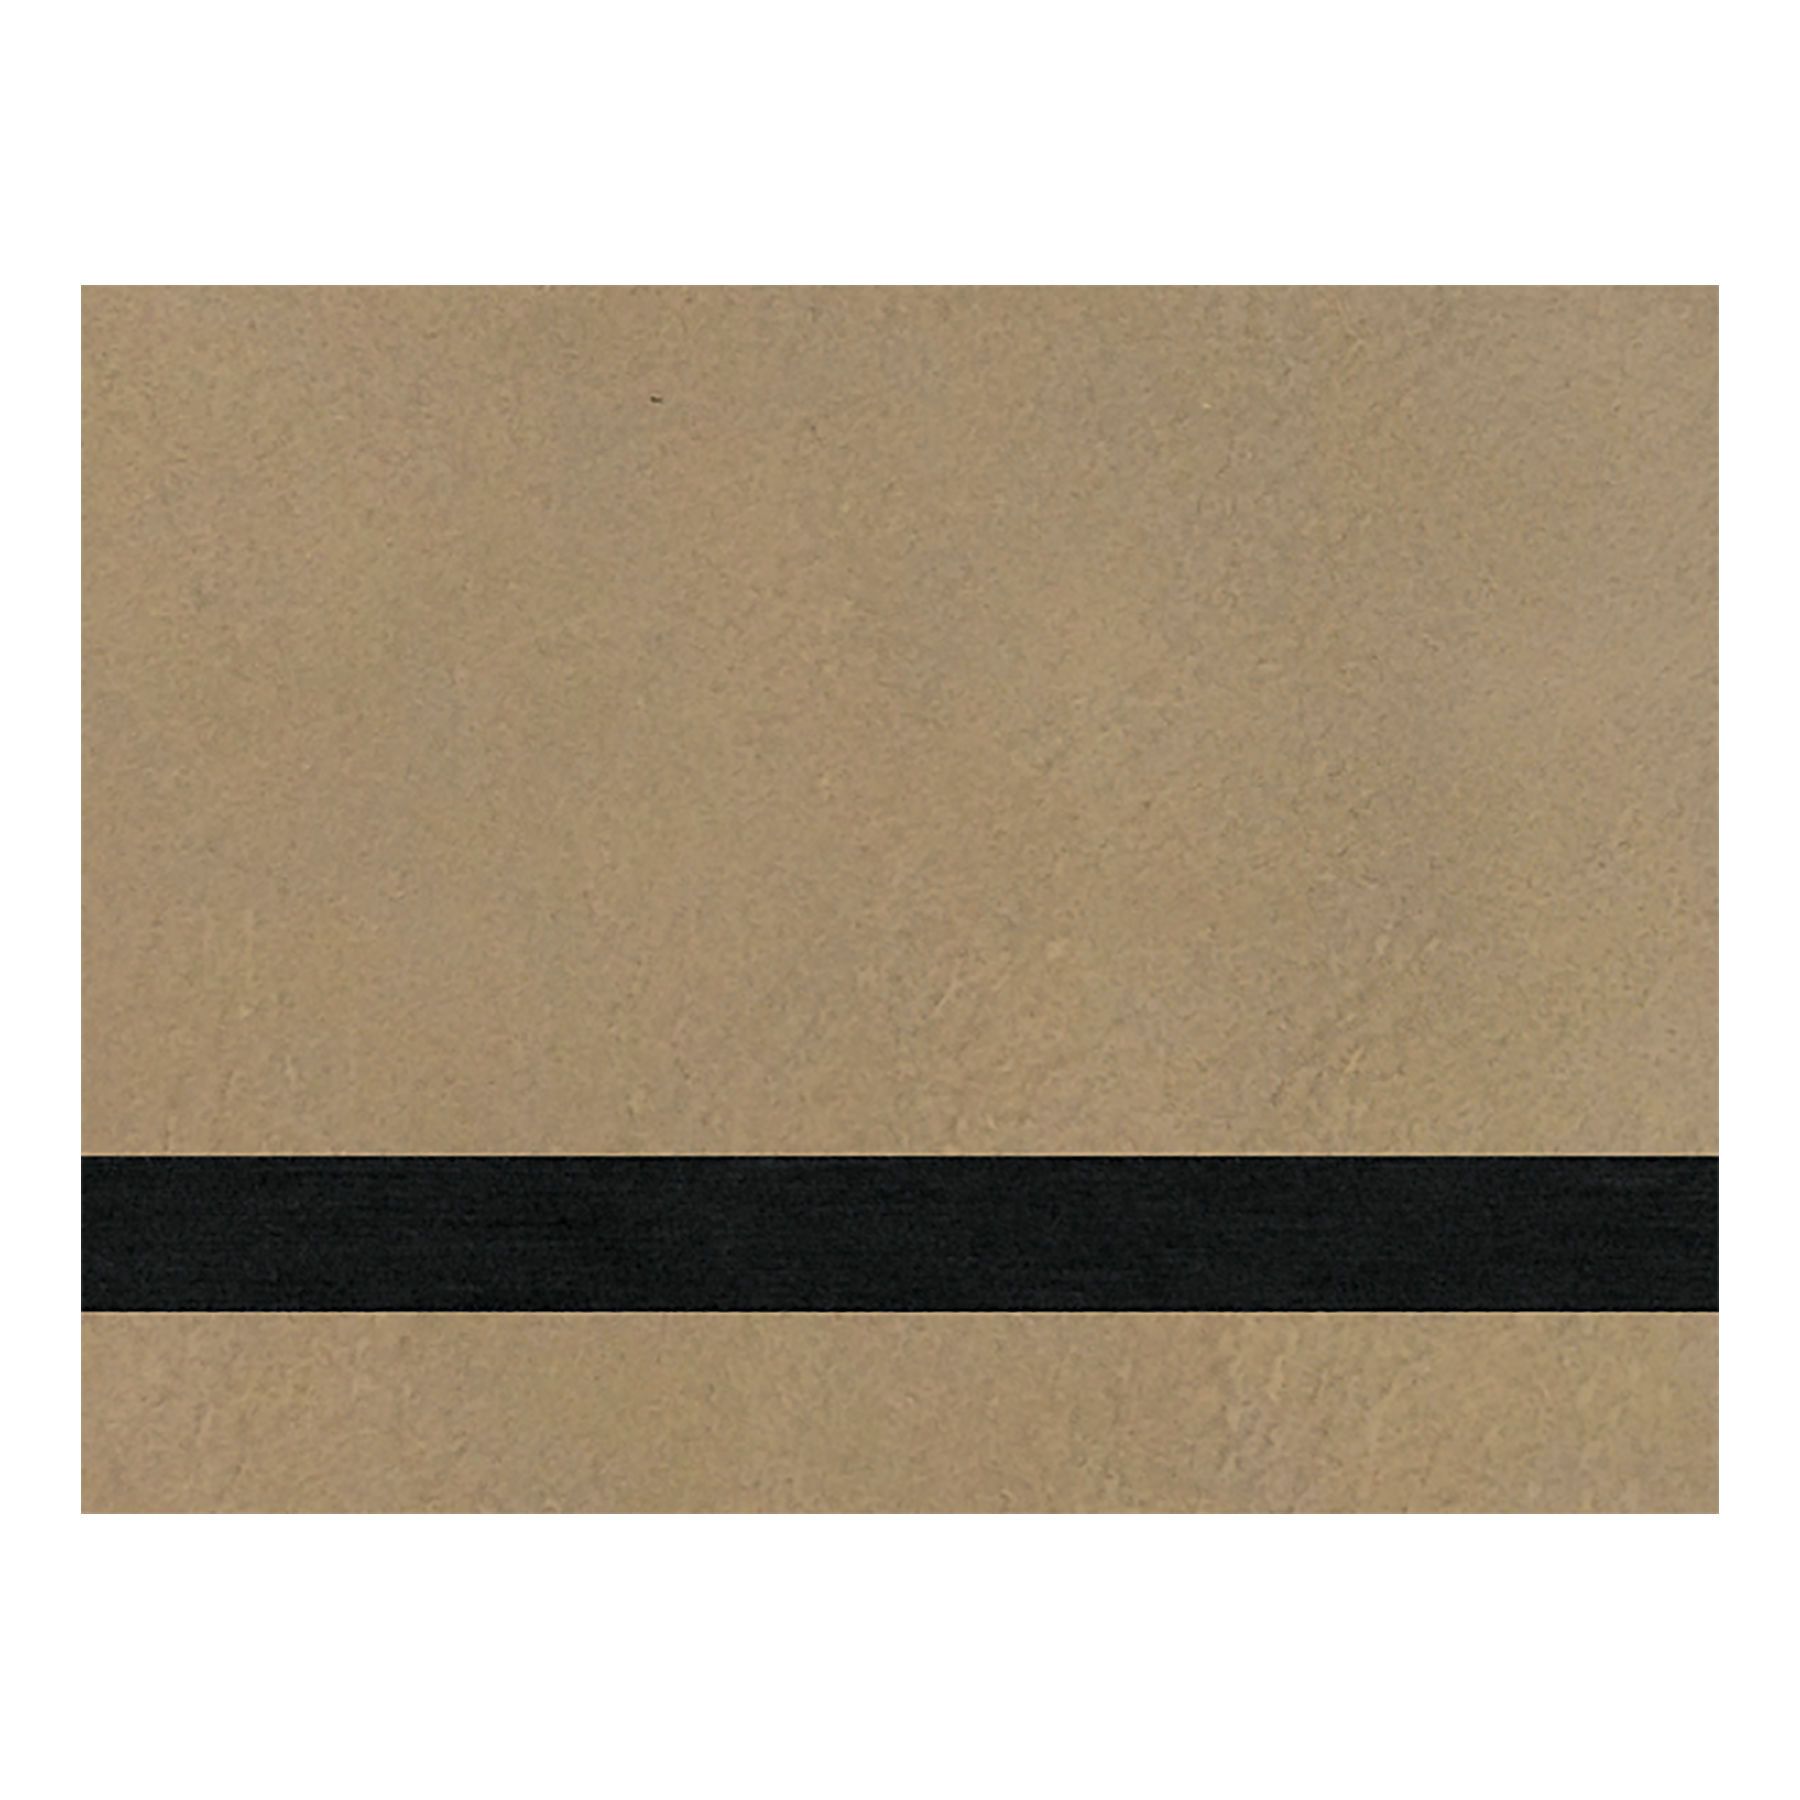 PRE-ORDER! Full Size Laserable Leatherette Sheet Stock, Boss Laser Engravers (Available Jan. 2022) Engraving Supplies Craftworks NW LS-1630 (29" x 15") Light Brown/Black 